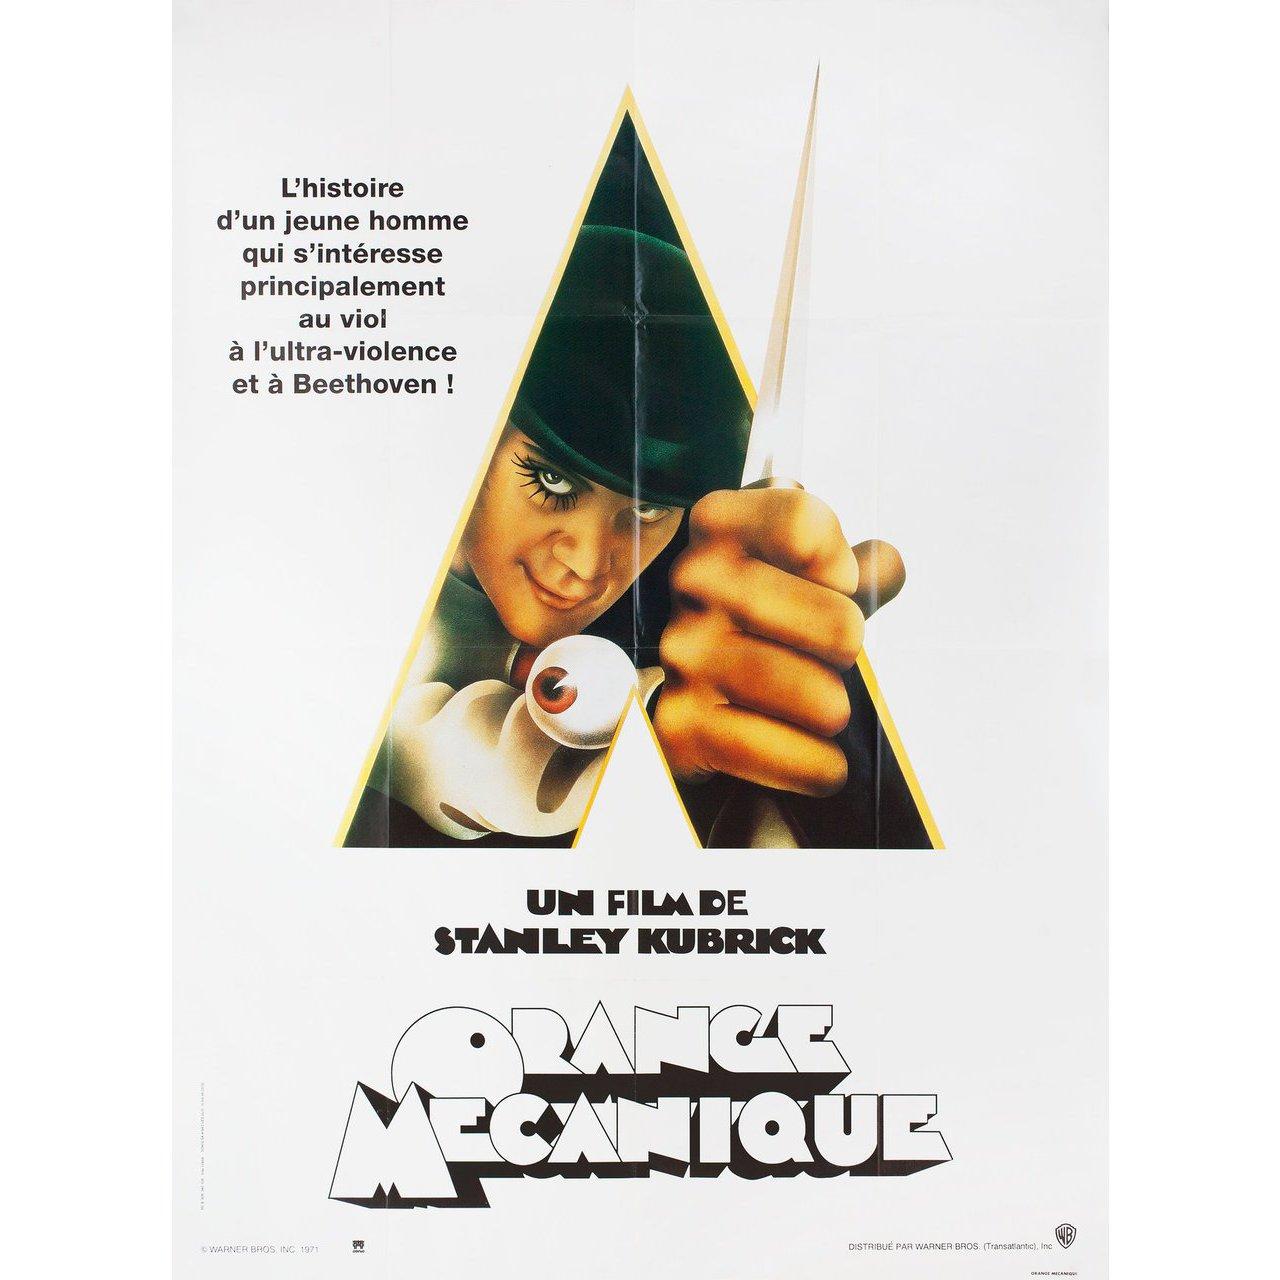 Original 1990s re-release French grande poster by Philip Castle for the 1971 film A Clockwork Orange directed by Stanley Kubrick with Malcolm McDowell / Patrick Magee / Michael Bates / Warren Clarke. Very Good-Fine condition, folded. Many original